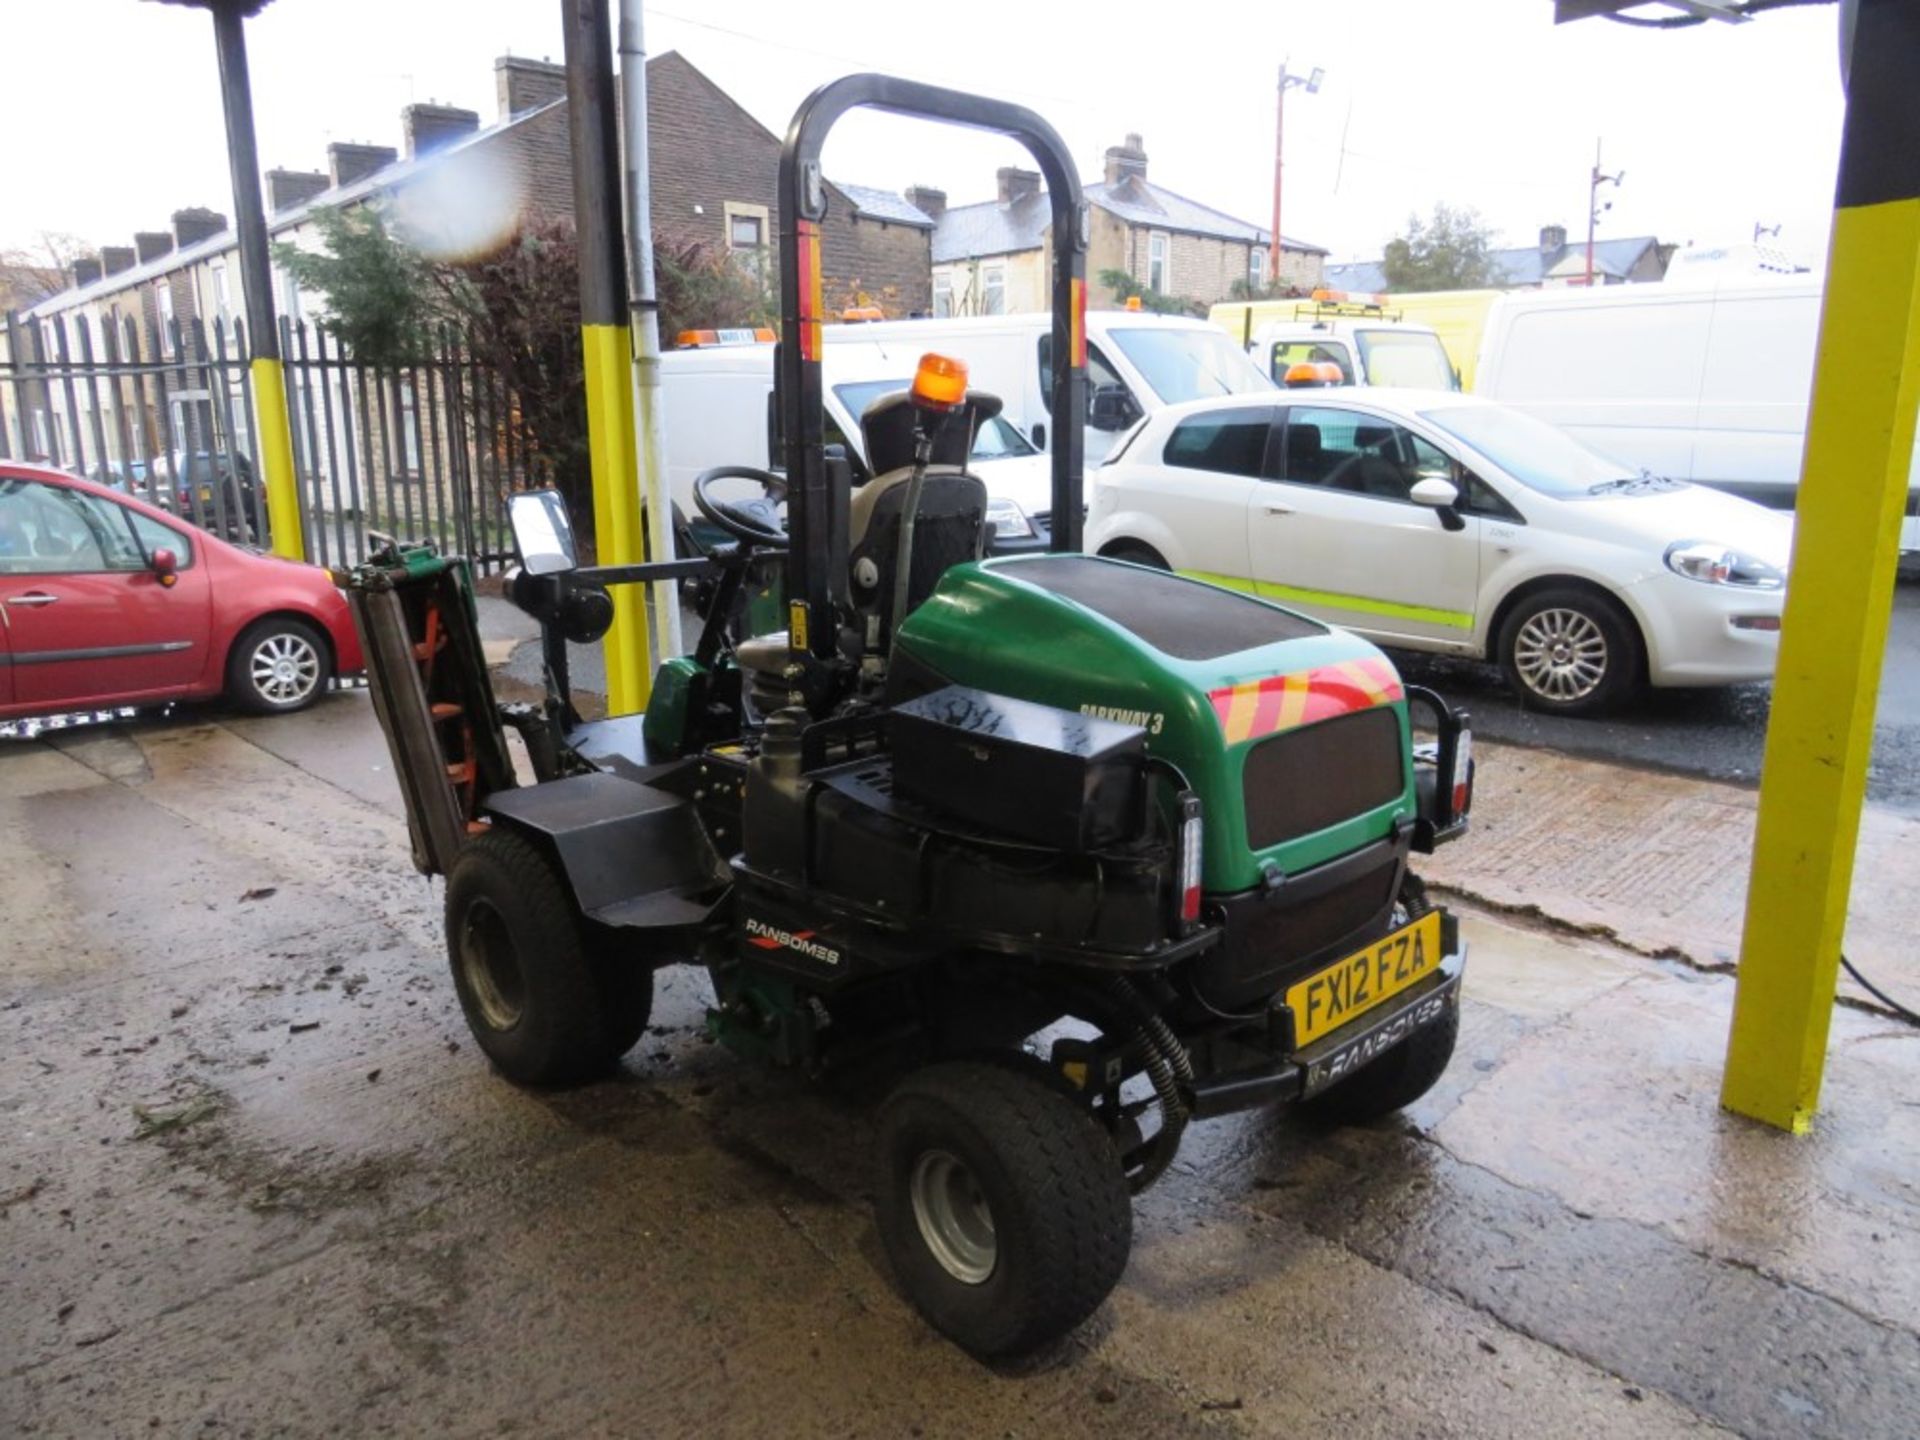 12 reg RANSOME PARKWAY 3 RIDE ON MOWER (DIRECT COUNCIL) 2176 HOURS, V5 HERE, 1 OWNER FROM NEW [+ - Image 3 of 5